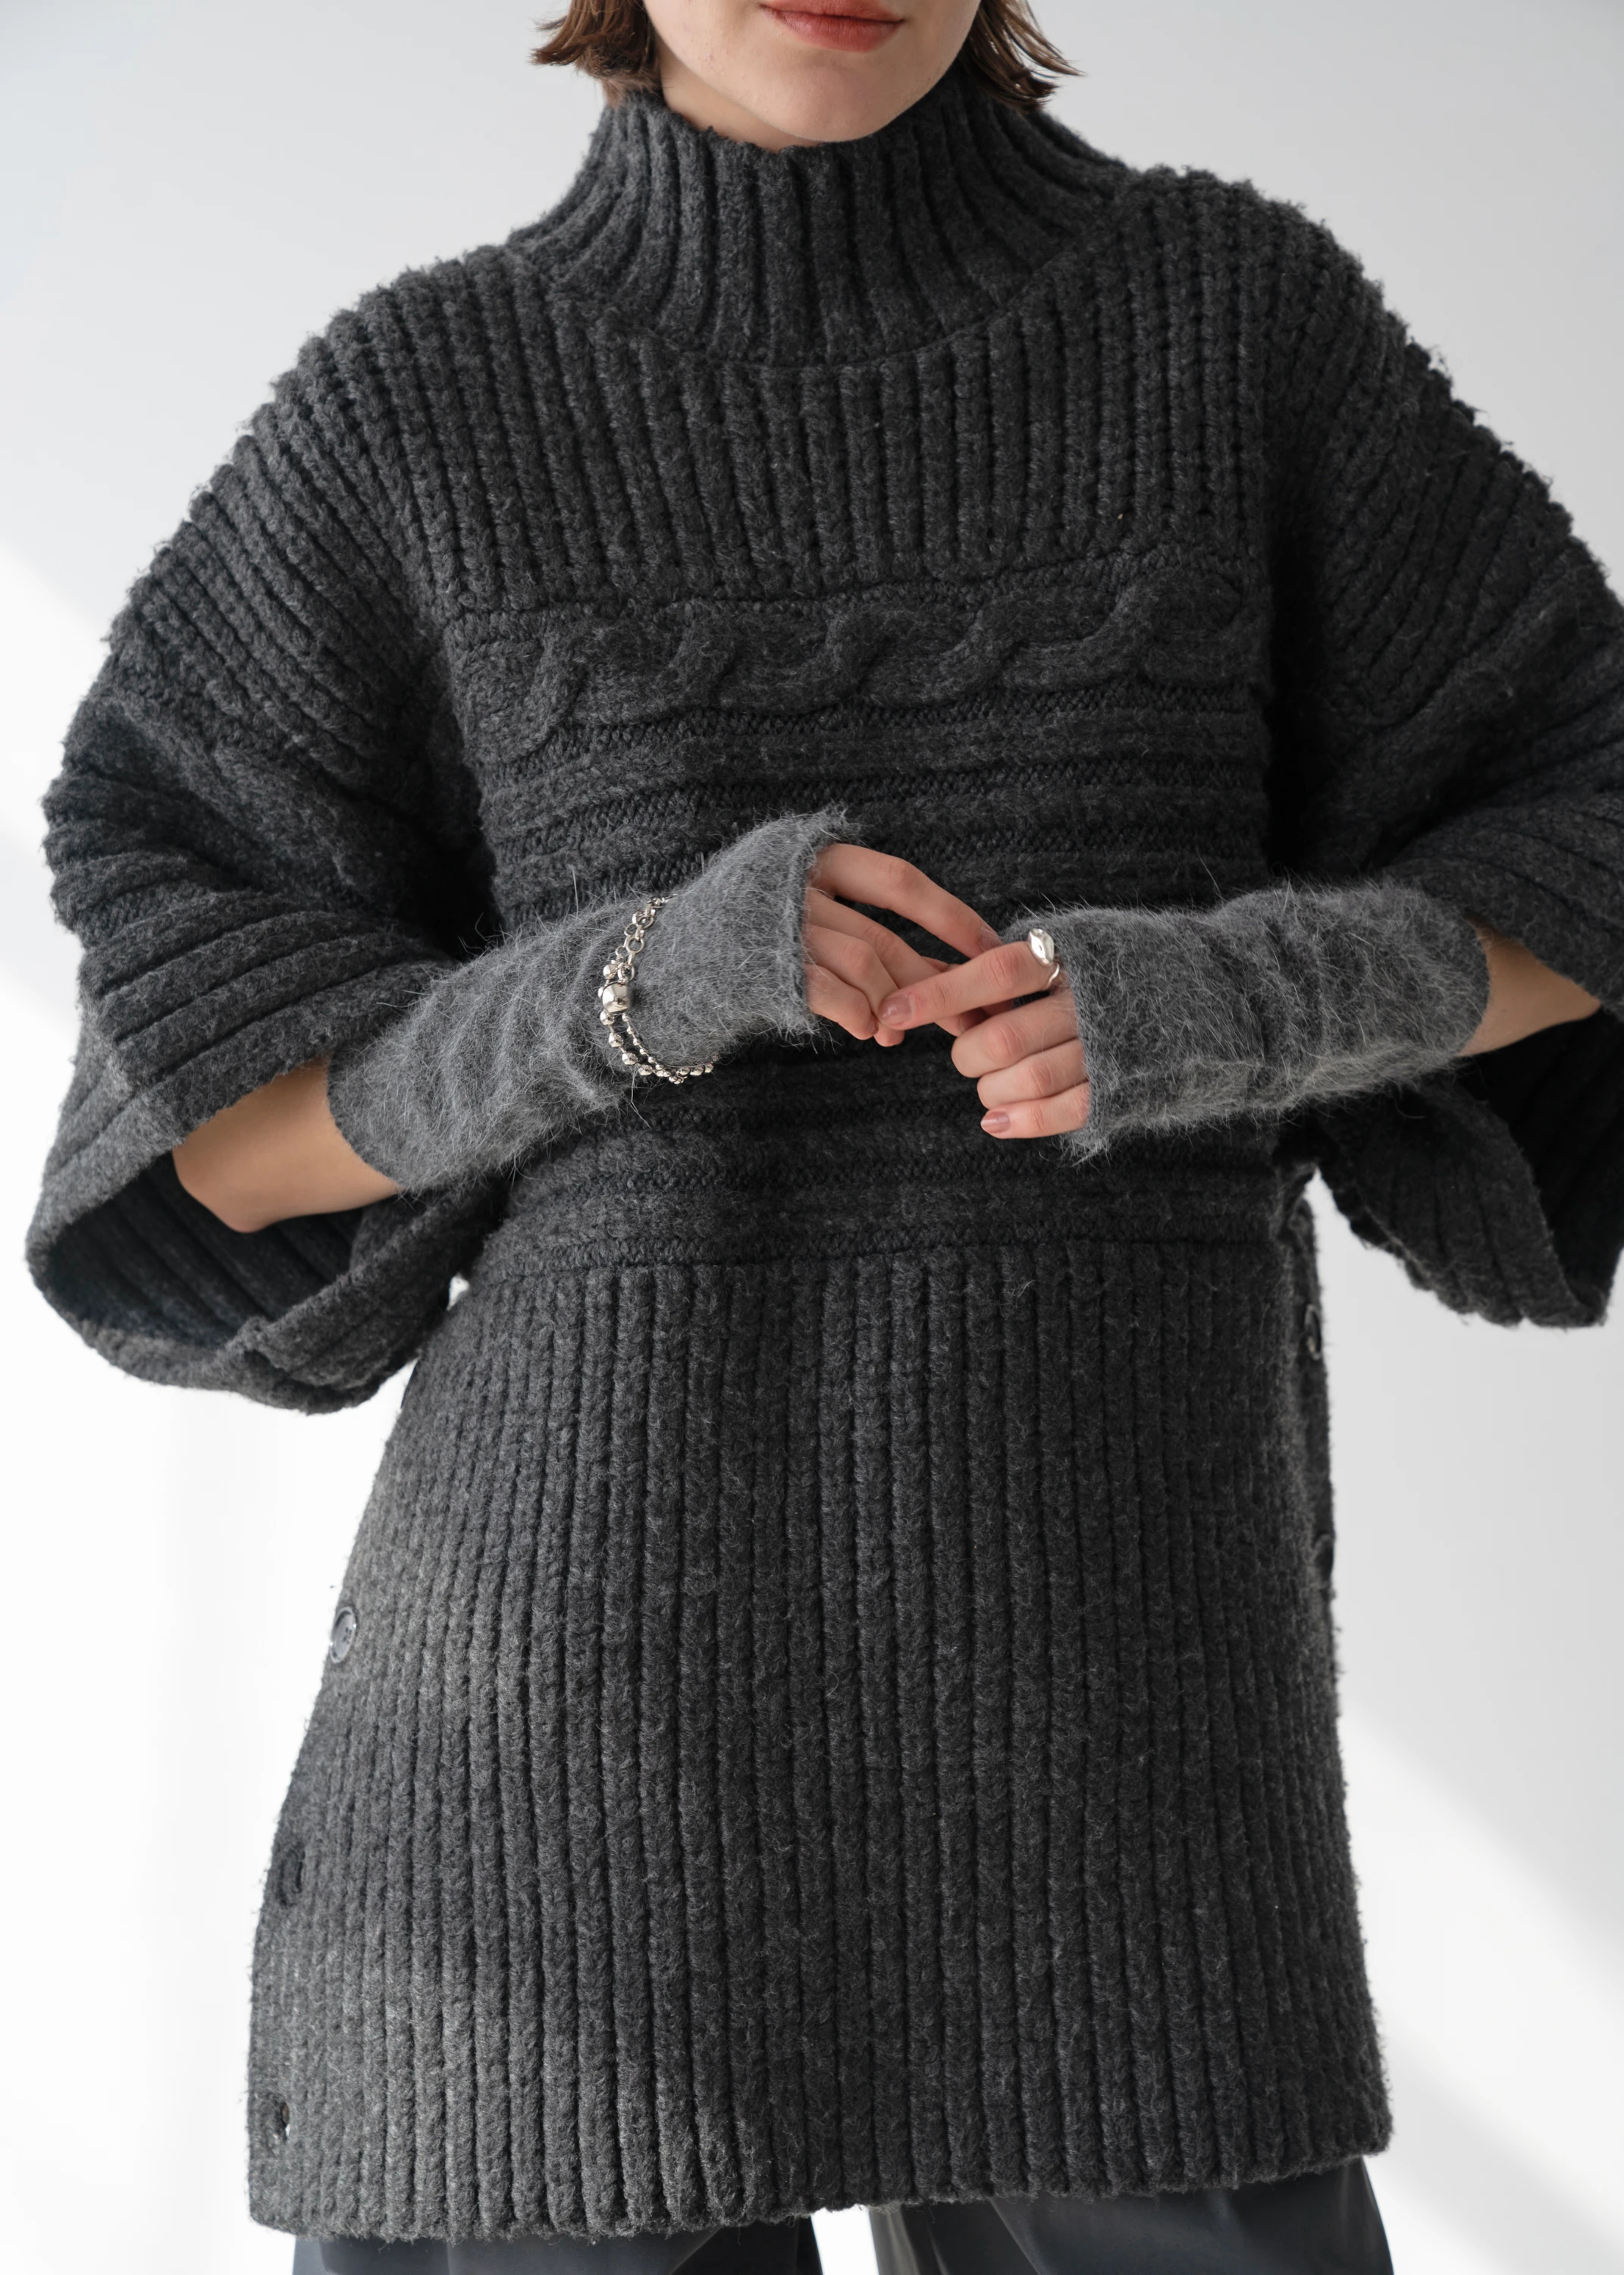 traverse cable half sleeve knit M/OP